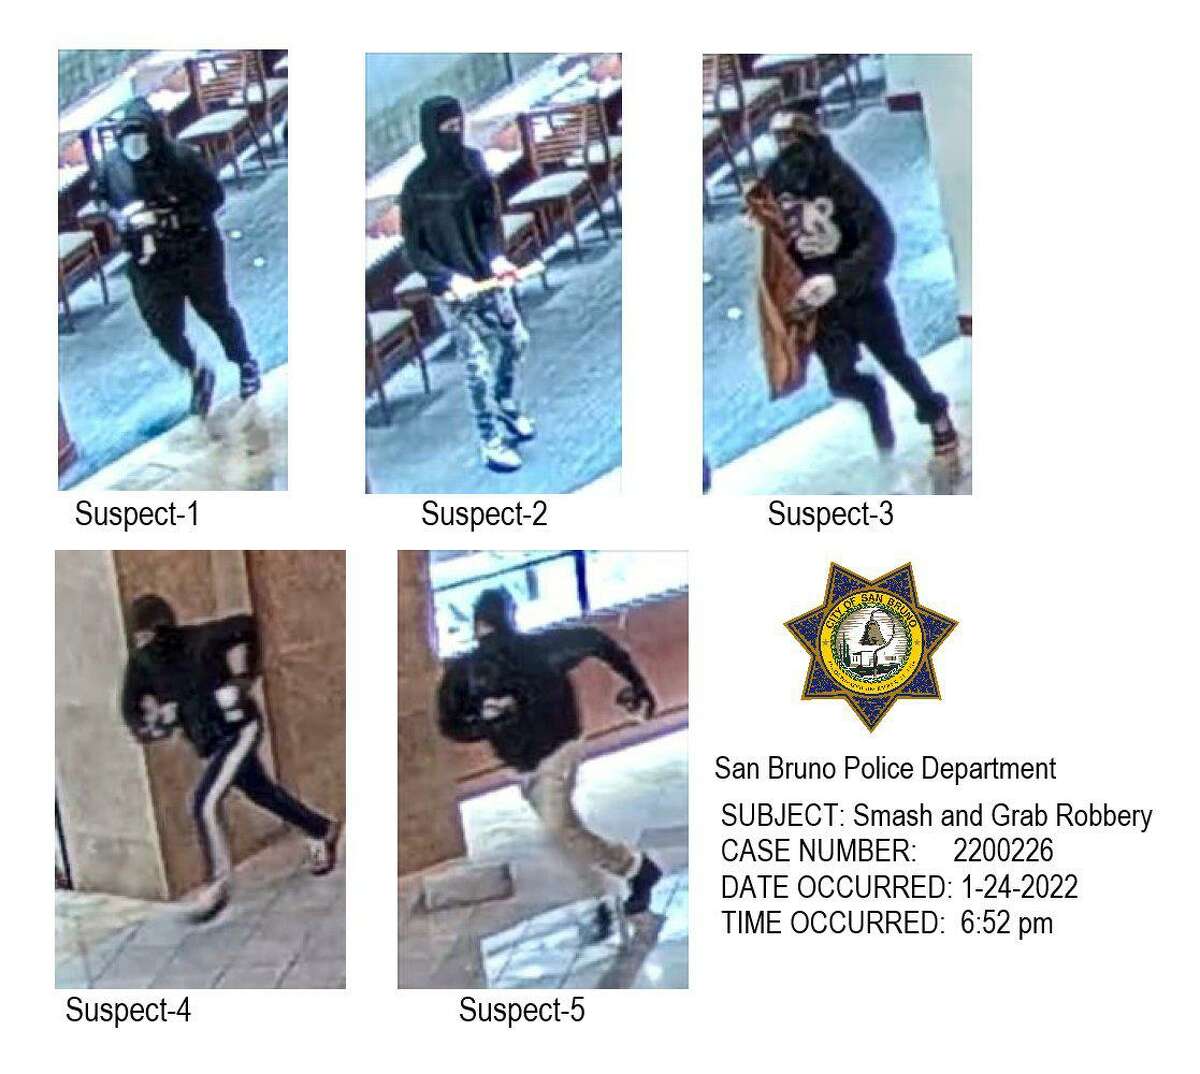 San Bruno police tweeted photos of five people allegedly involved in a smash-and-grab robbery Monday at The Shops at Tanforan in San Bruno.